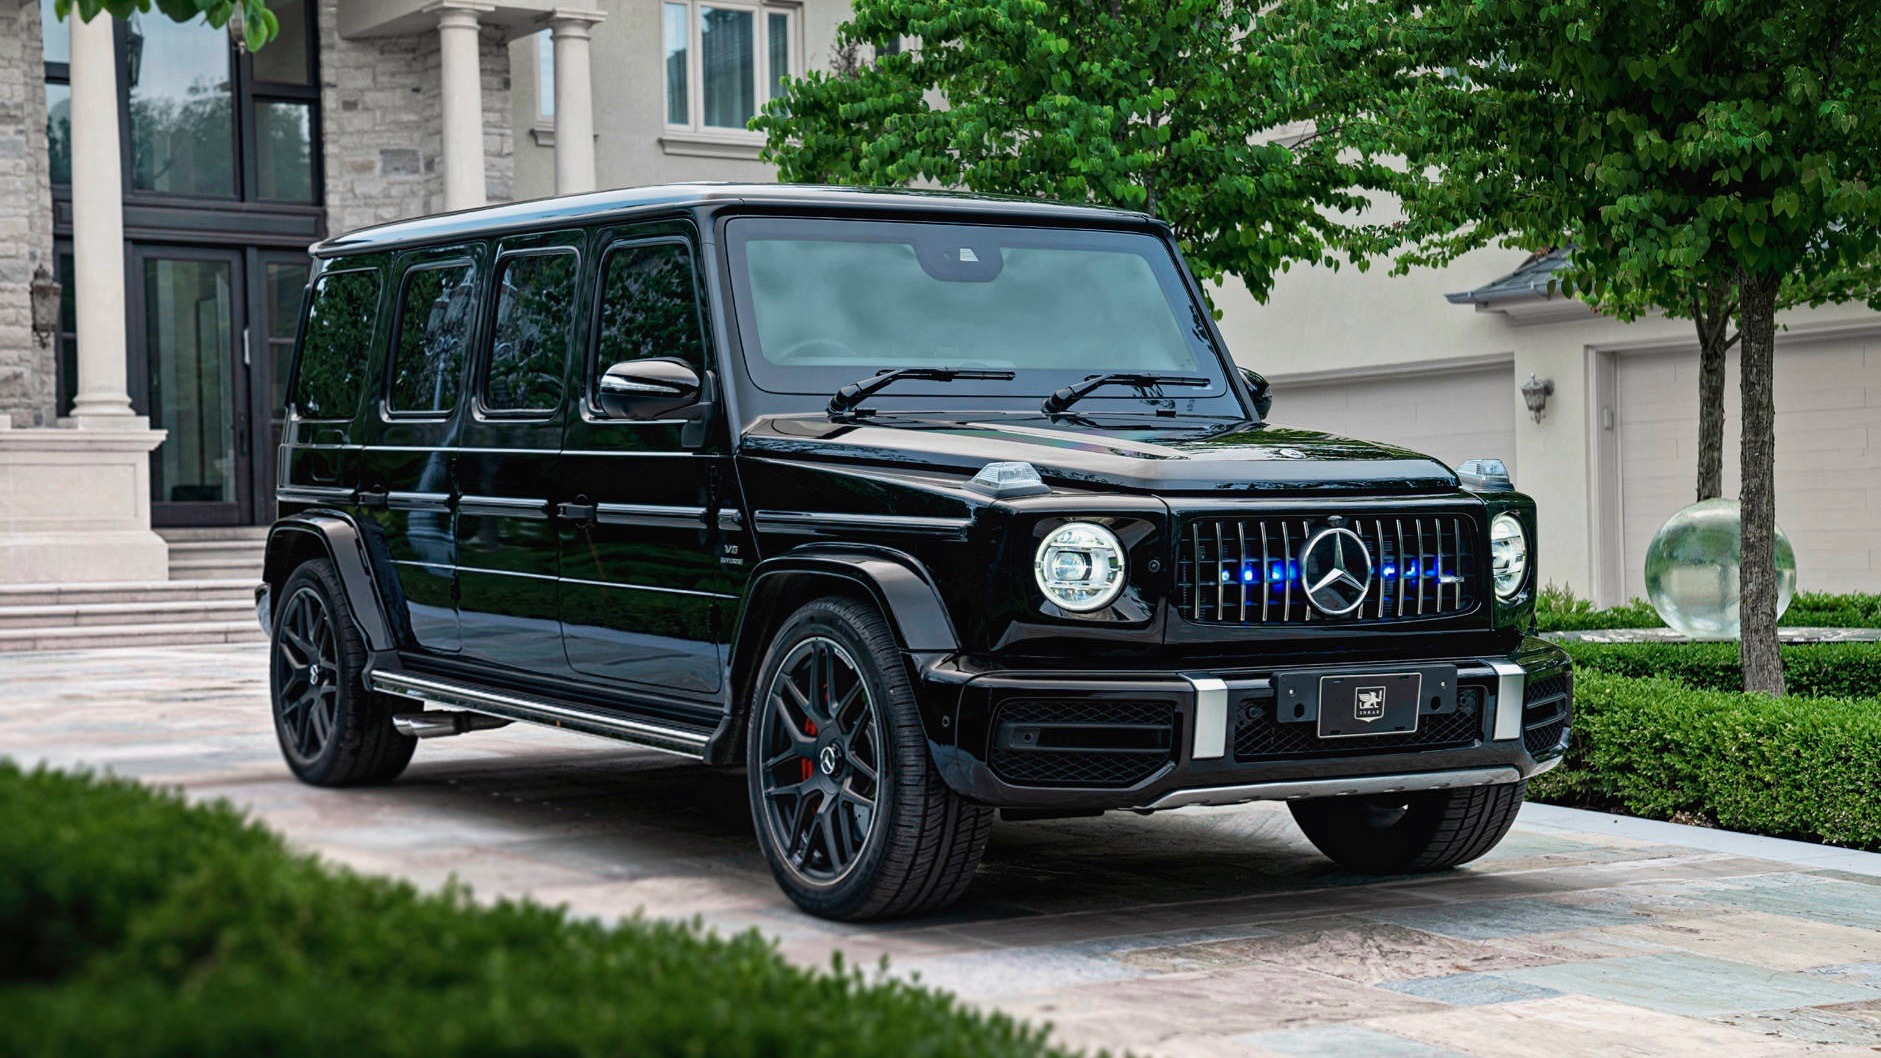 Armored Mercedes Amg G63 Limo Is A Dictator S Dream